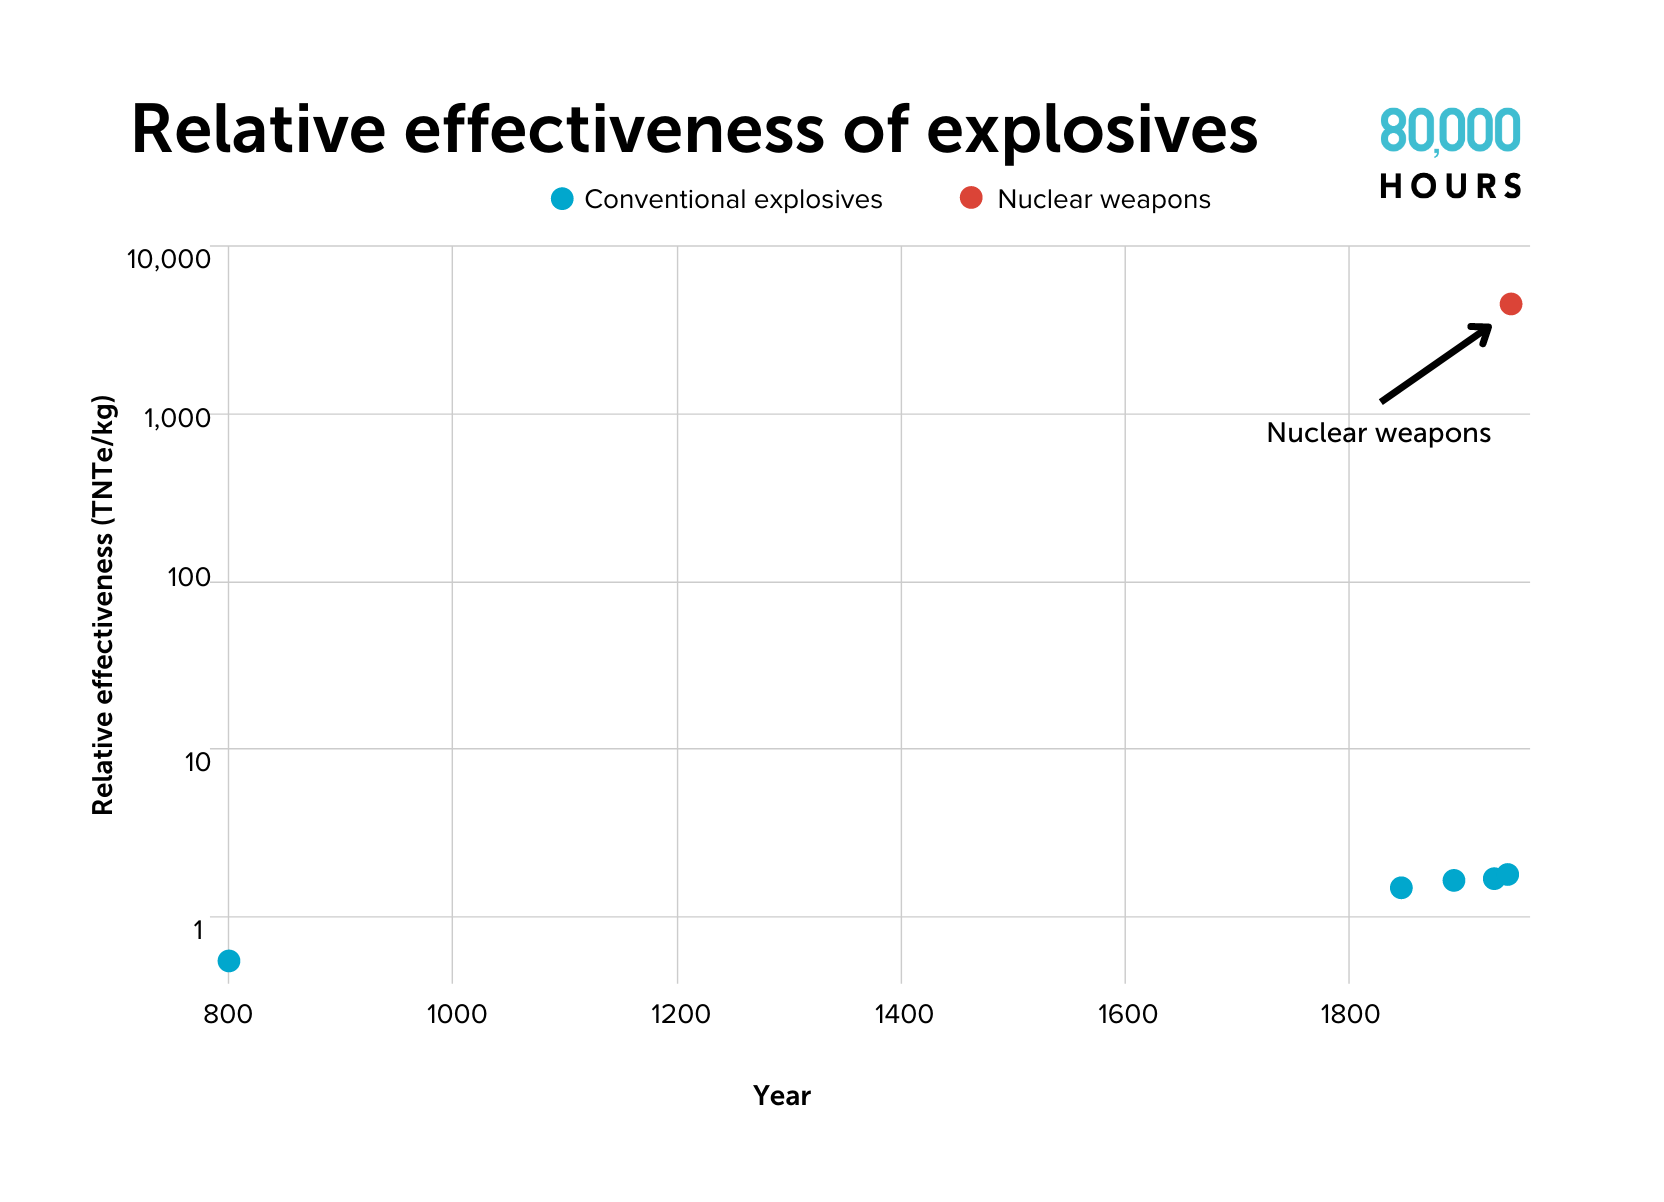 Graph showing that early nuclear weapons are 1,000s of times more explosive than previous conventional explosives